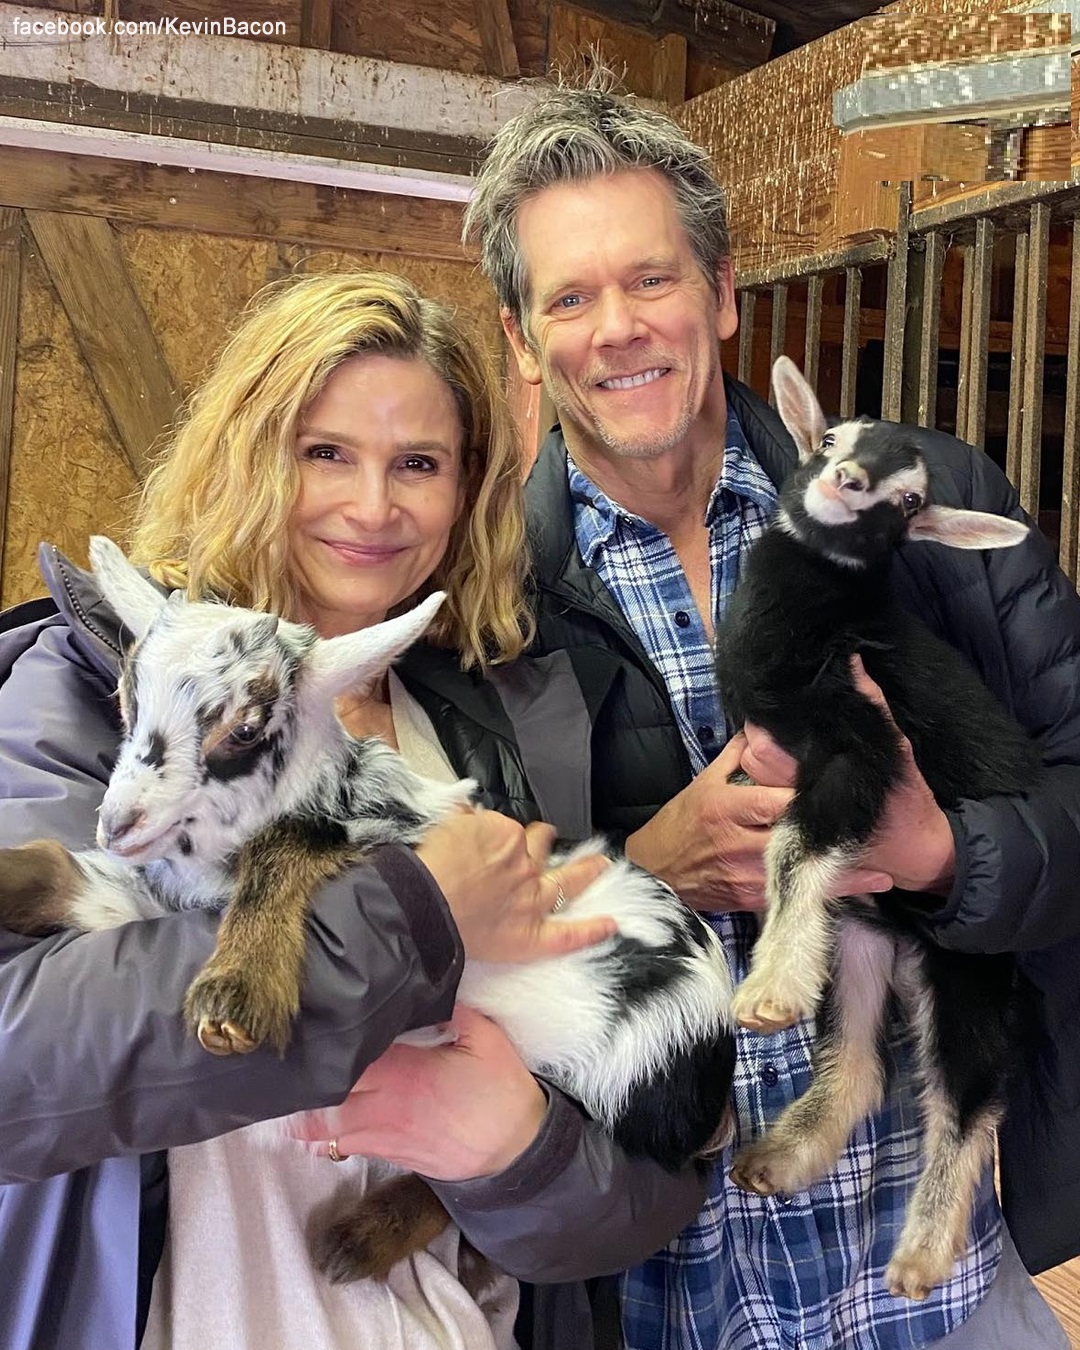 Kevin Bacon Moved to Live on a Ranch after Losing Money – He Raises Livestock & Sings with His Wife of 35 Years